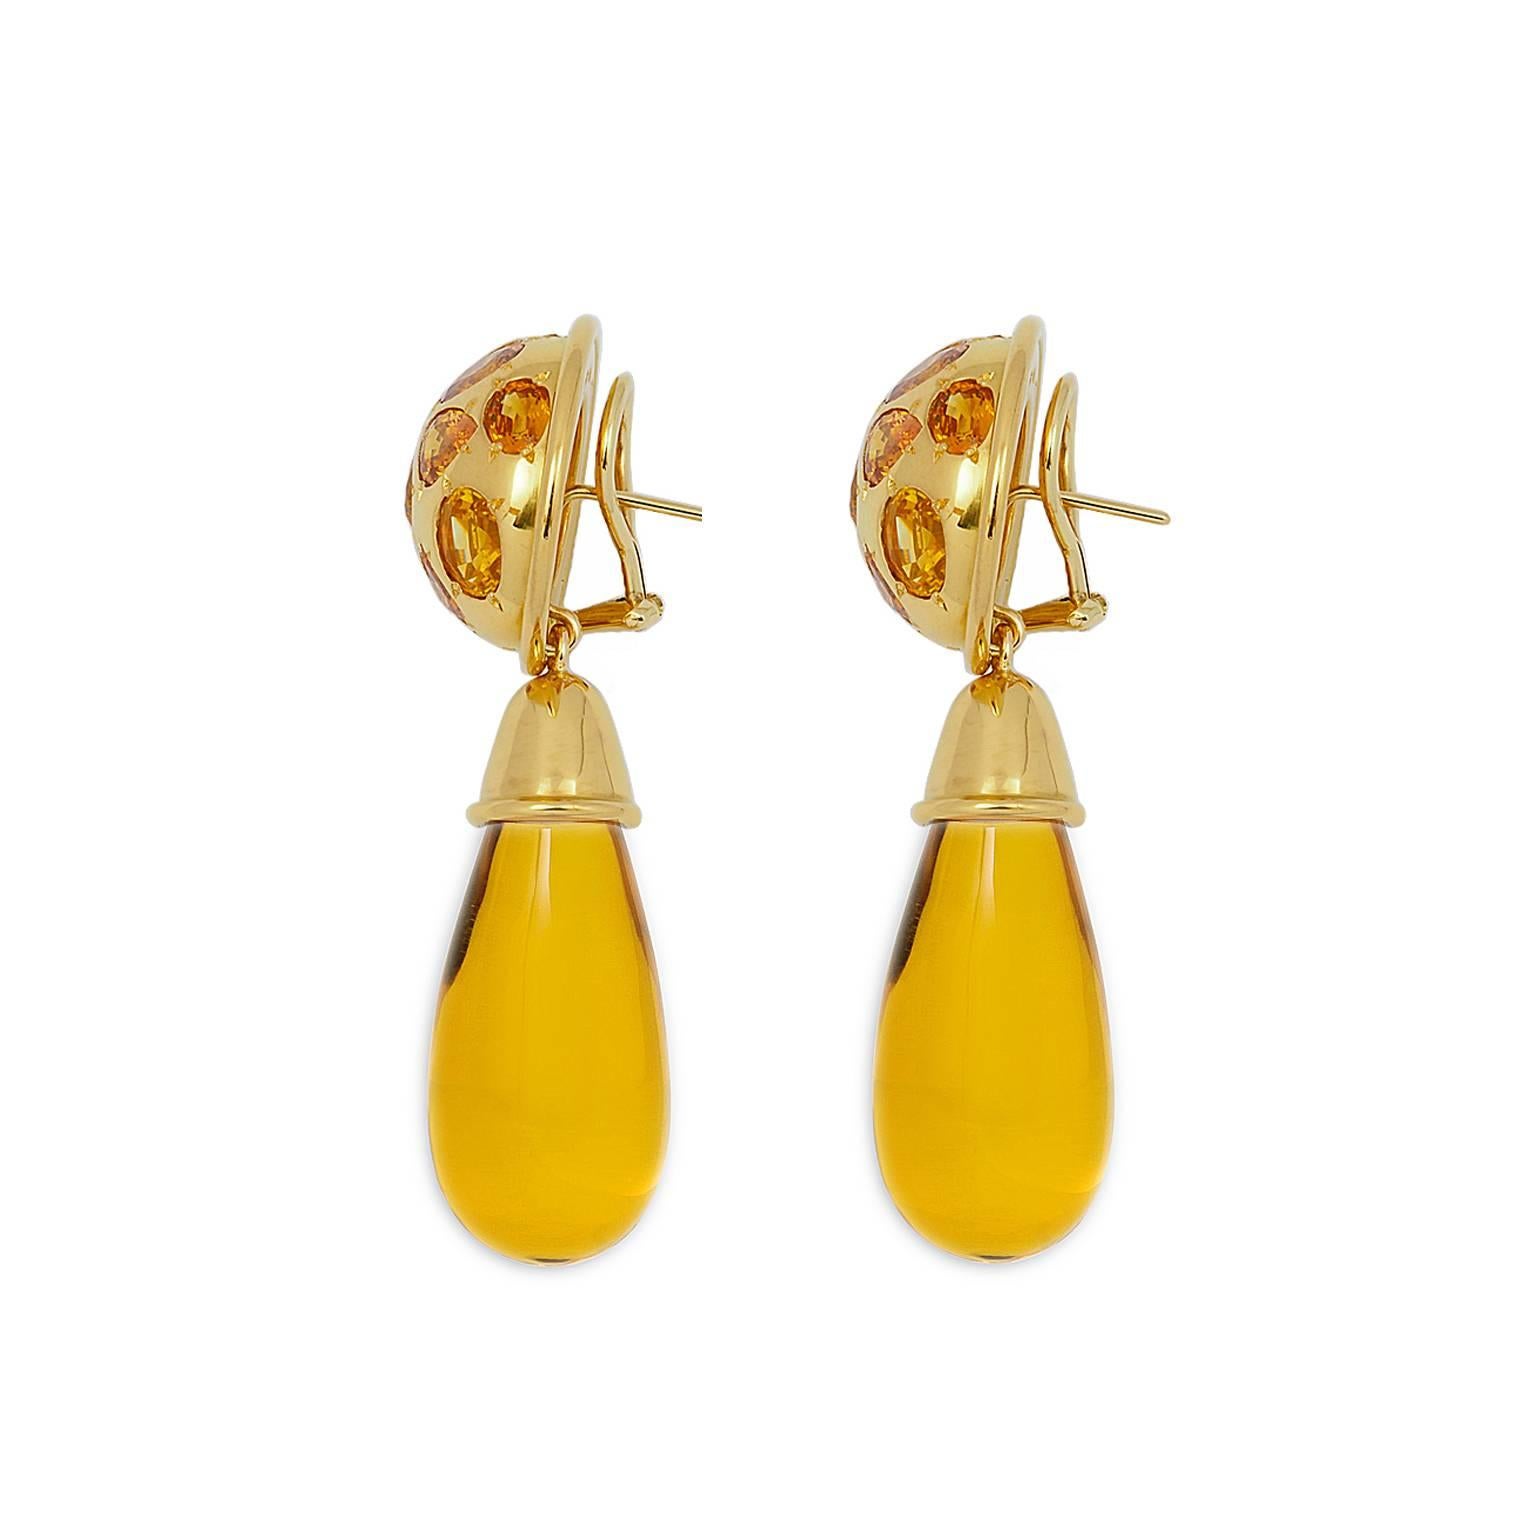 Elegant drop earrings with beautiful amber 17.01 ct and at the top are 24 yellow sapphires embedded with a weight of 22.33 ct. The bottom part is detachable and the upper part can be worn alone, it has a diameter of 24 mm. Designed by Colleen B.